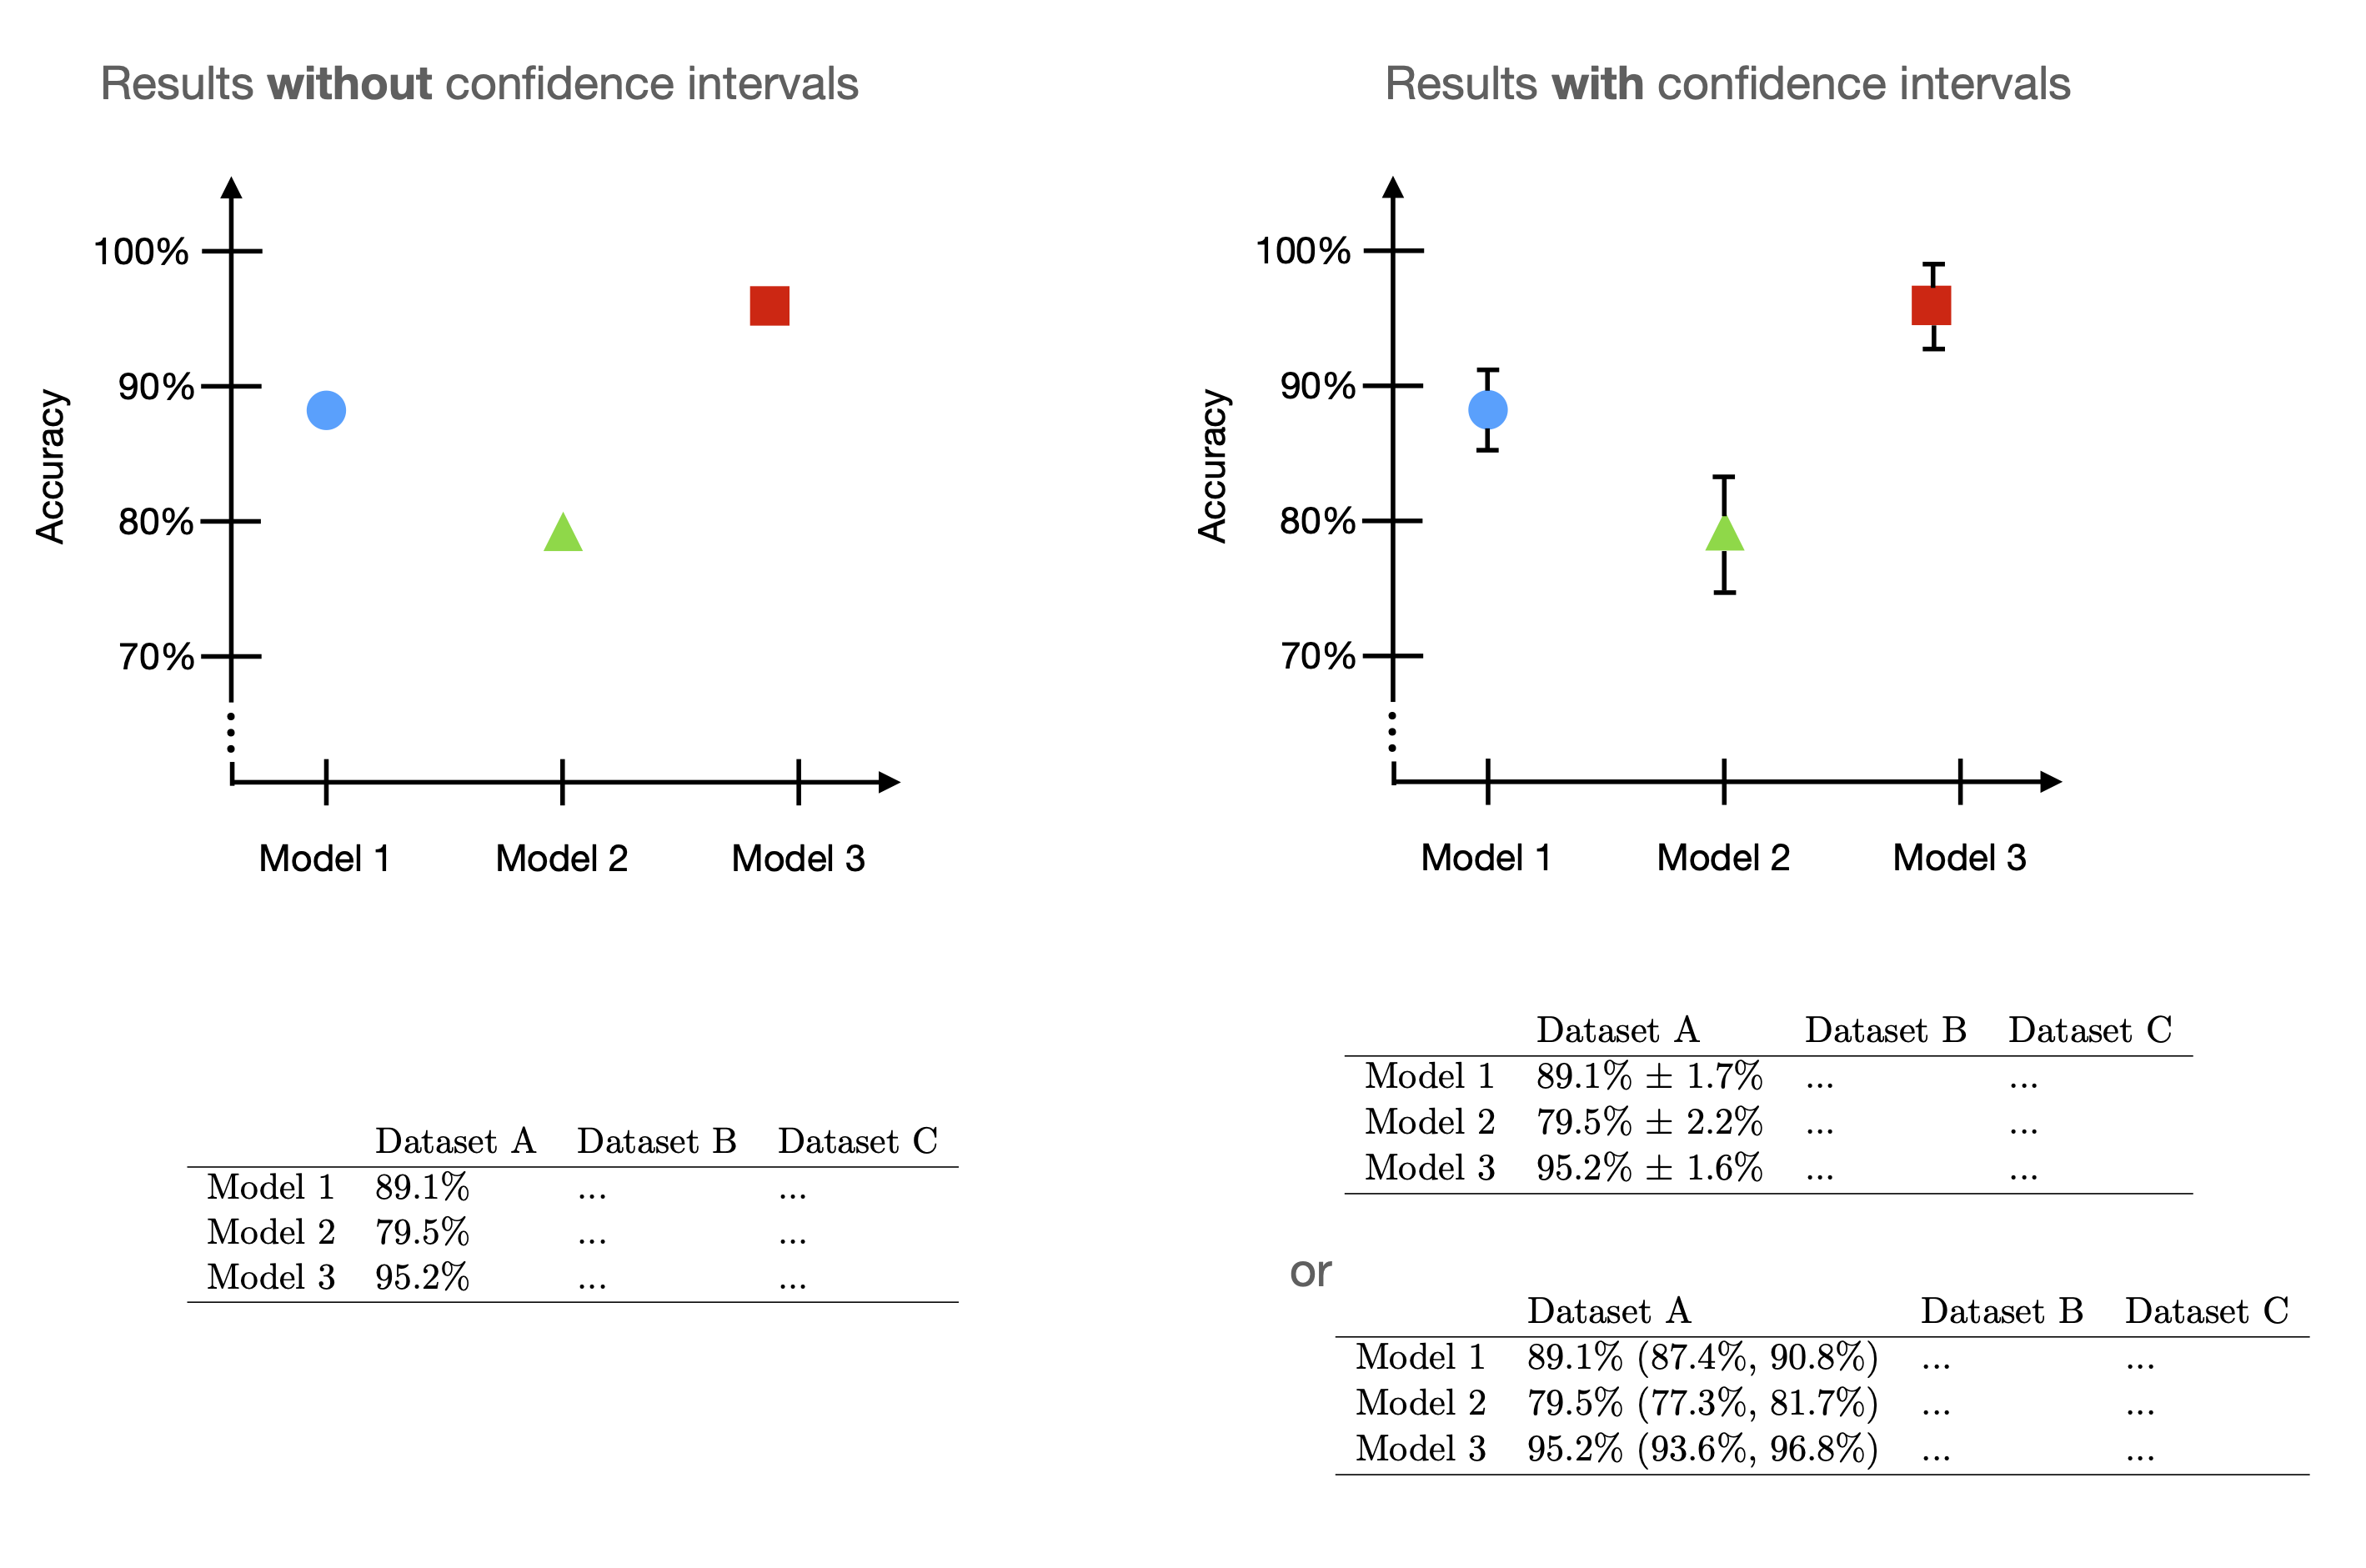 With and without confidence intervals